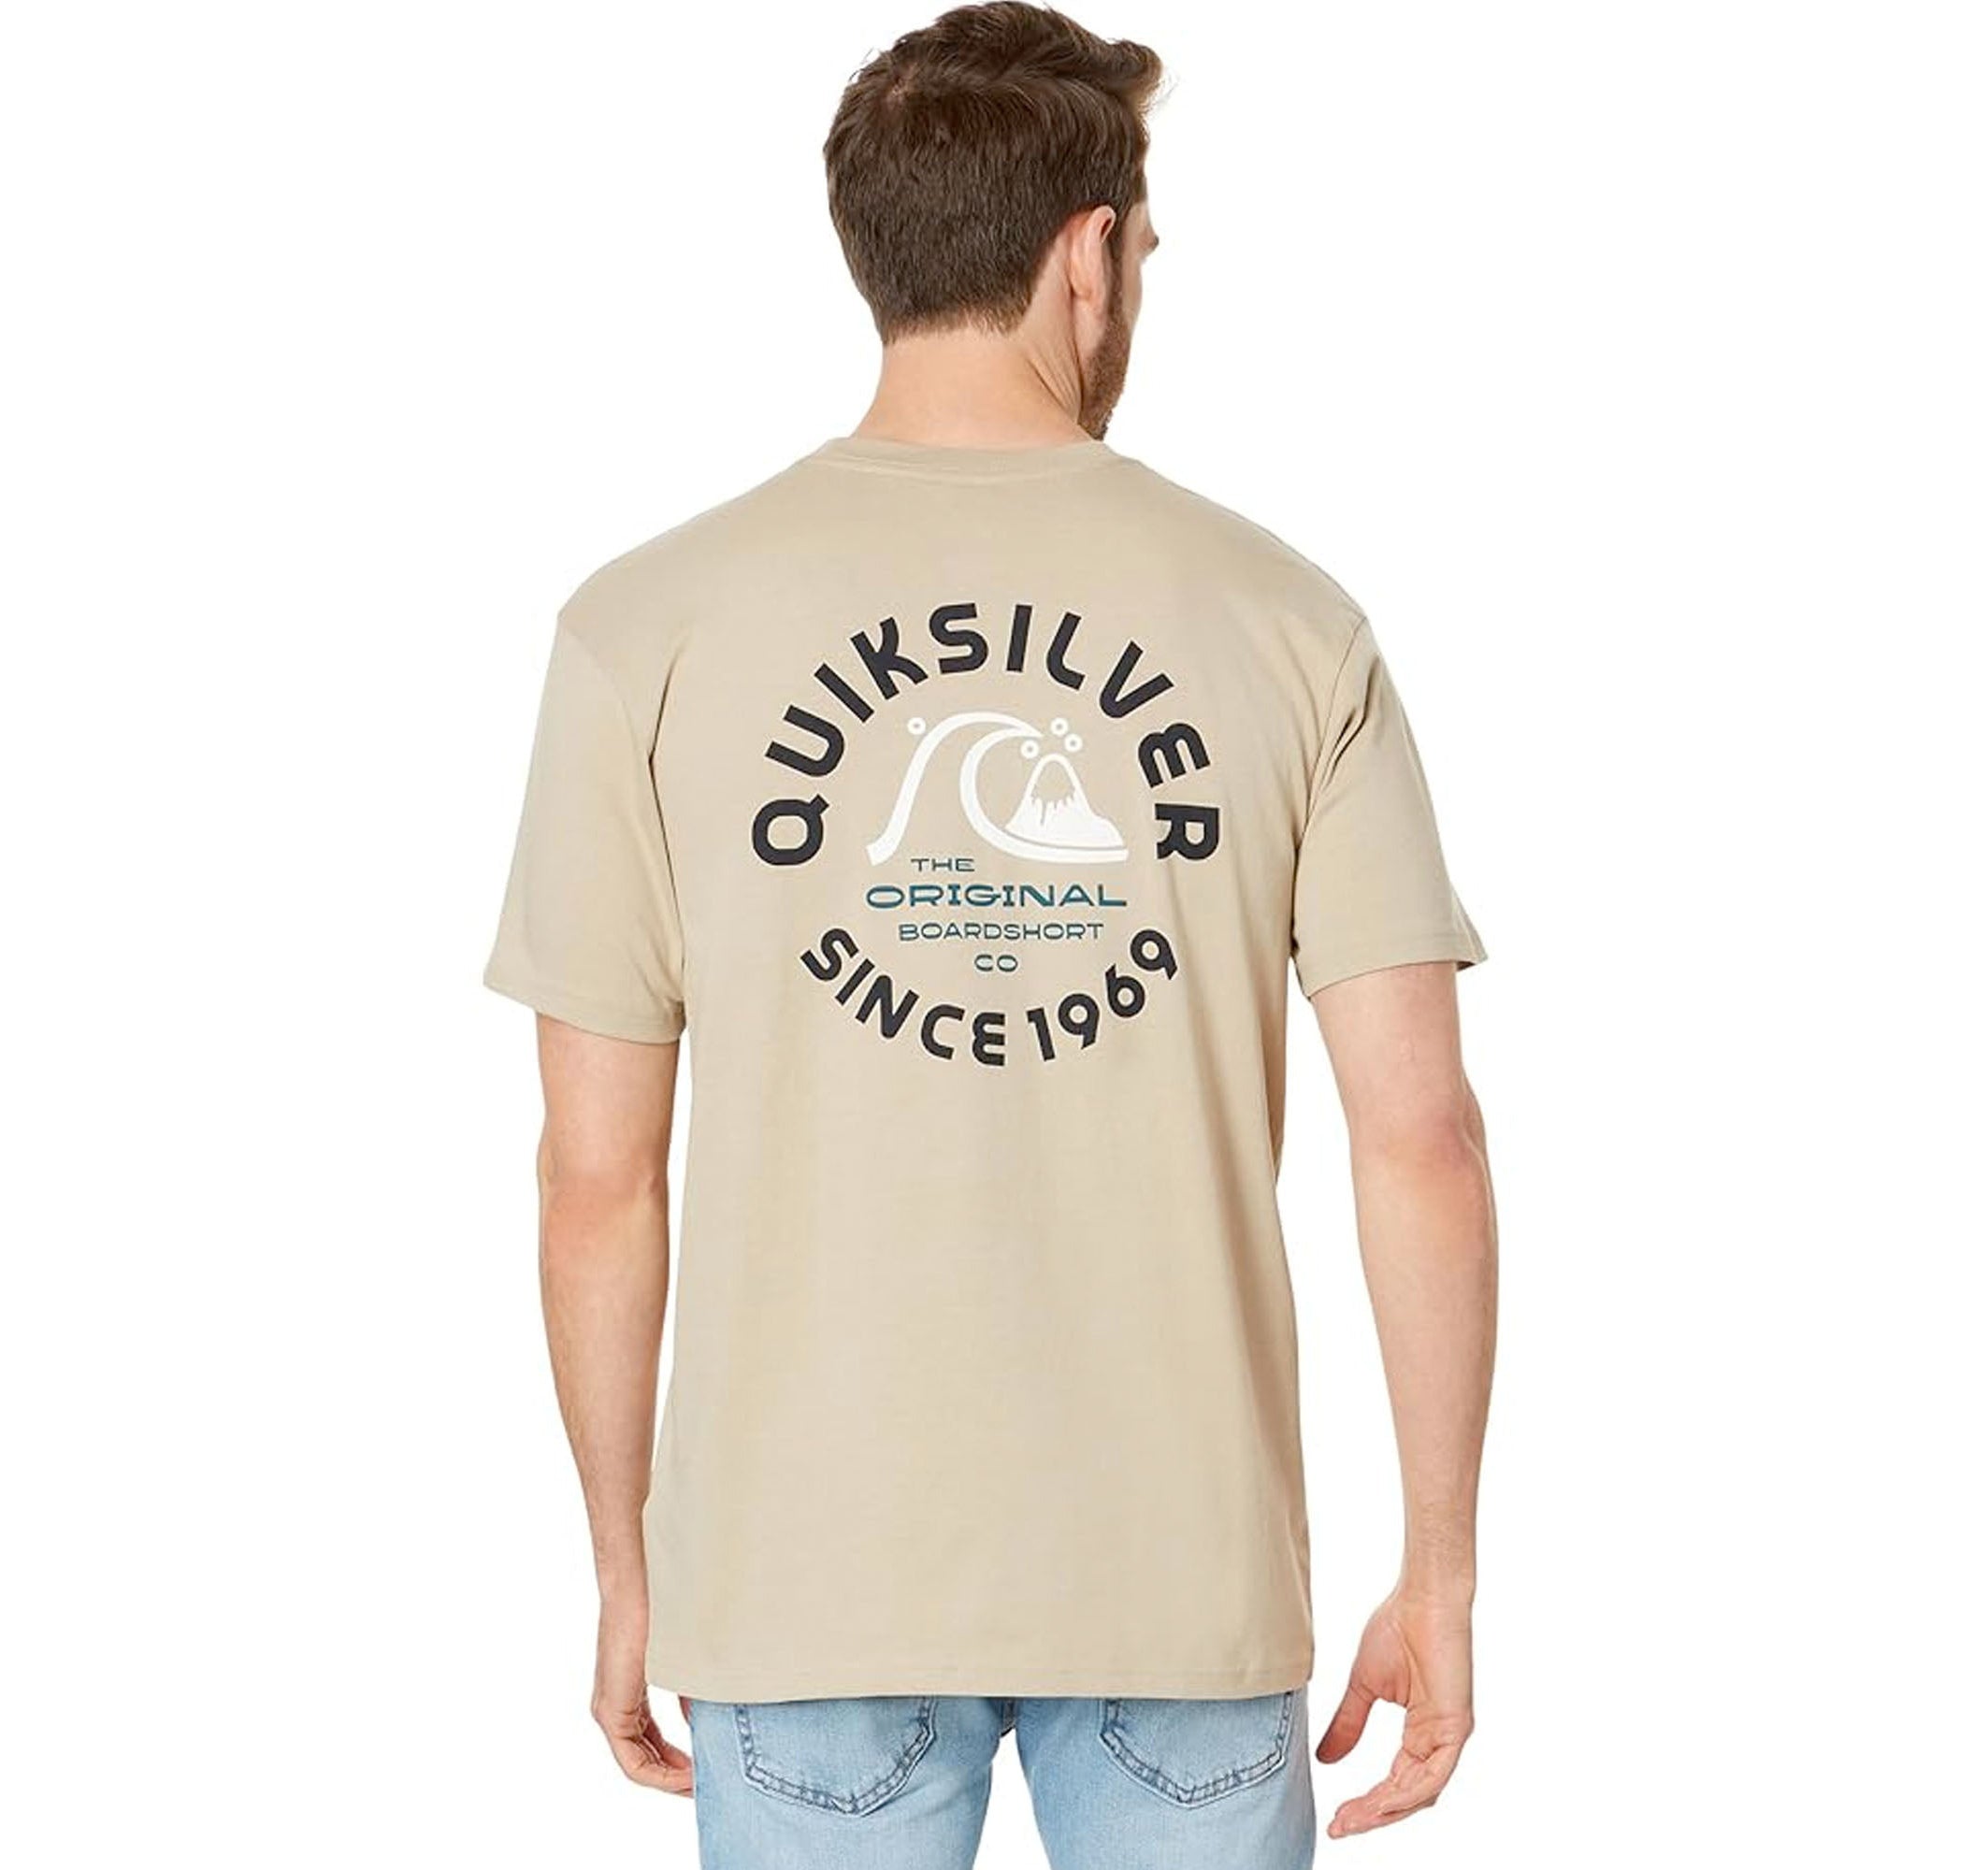 Quiksilver Ice Cold S/S Tee THZ0 L